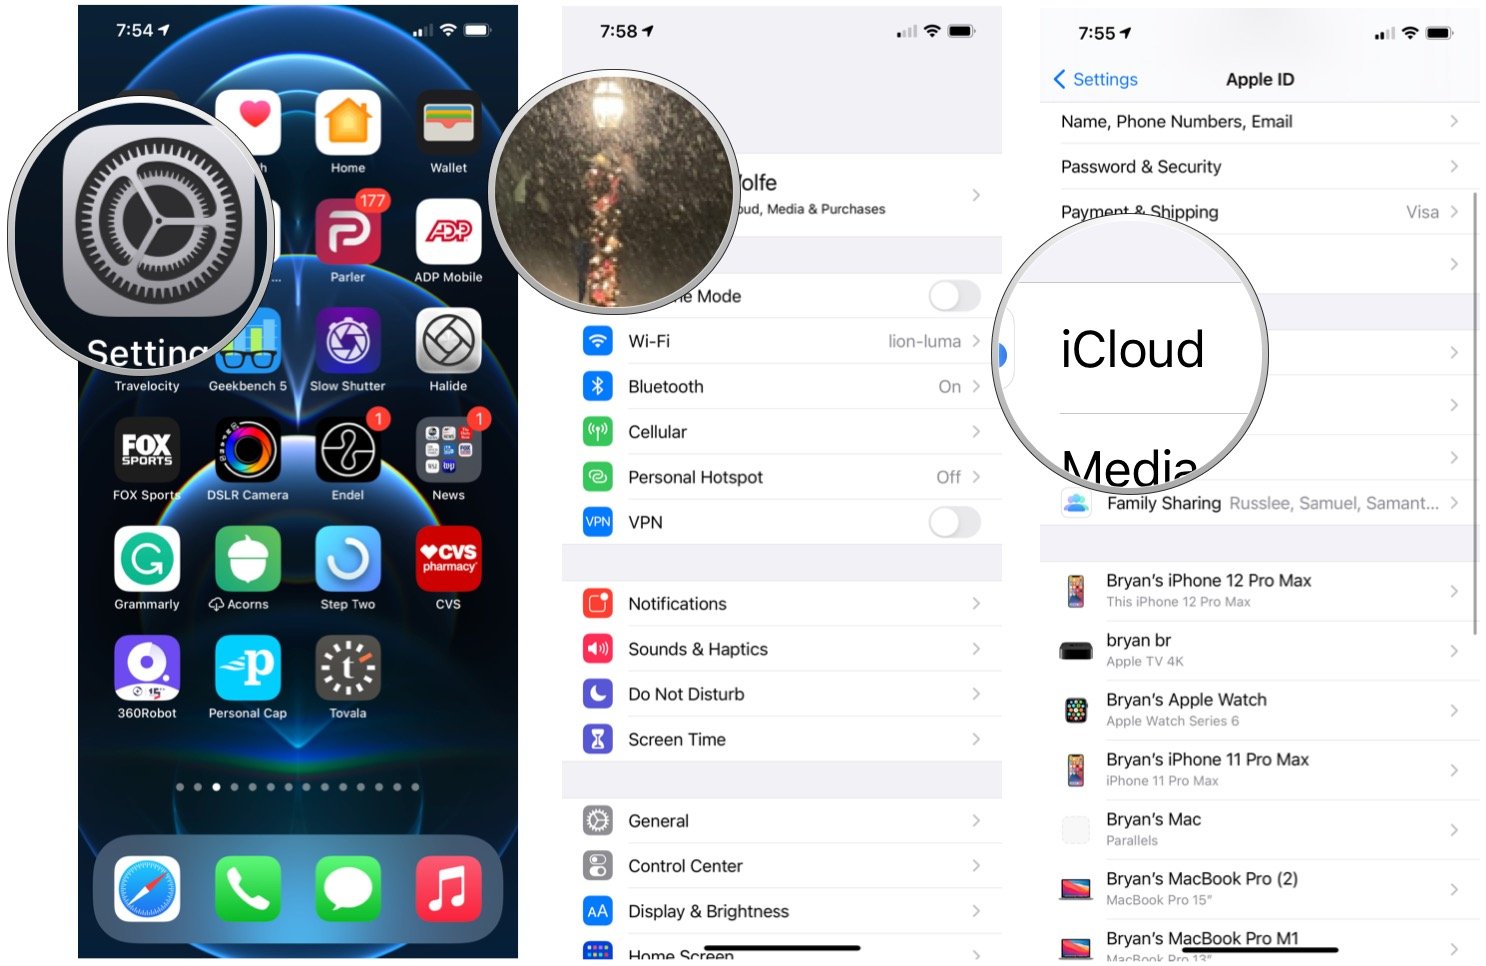 To manage iCloud sync permissions on iPhone and iPad, launch the Settings app from your Home Screen. Tap Apple ID banner, then choose iCloud.